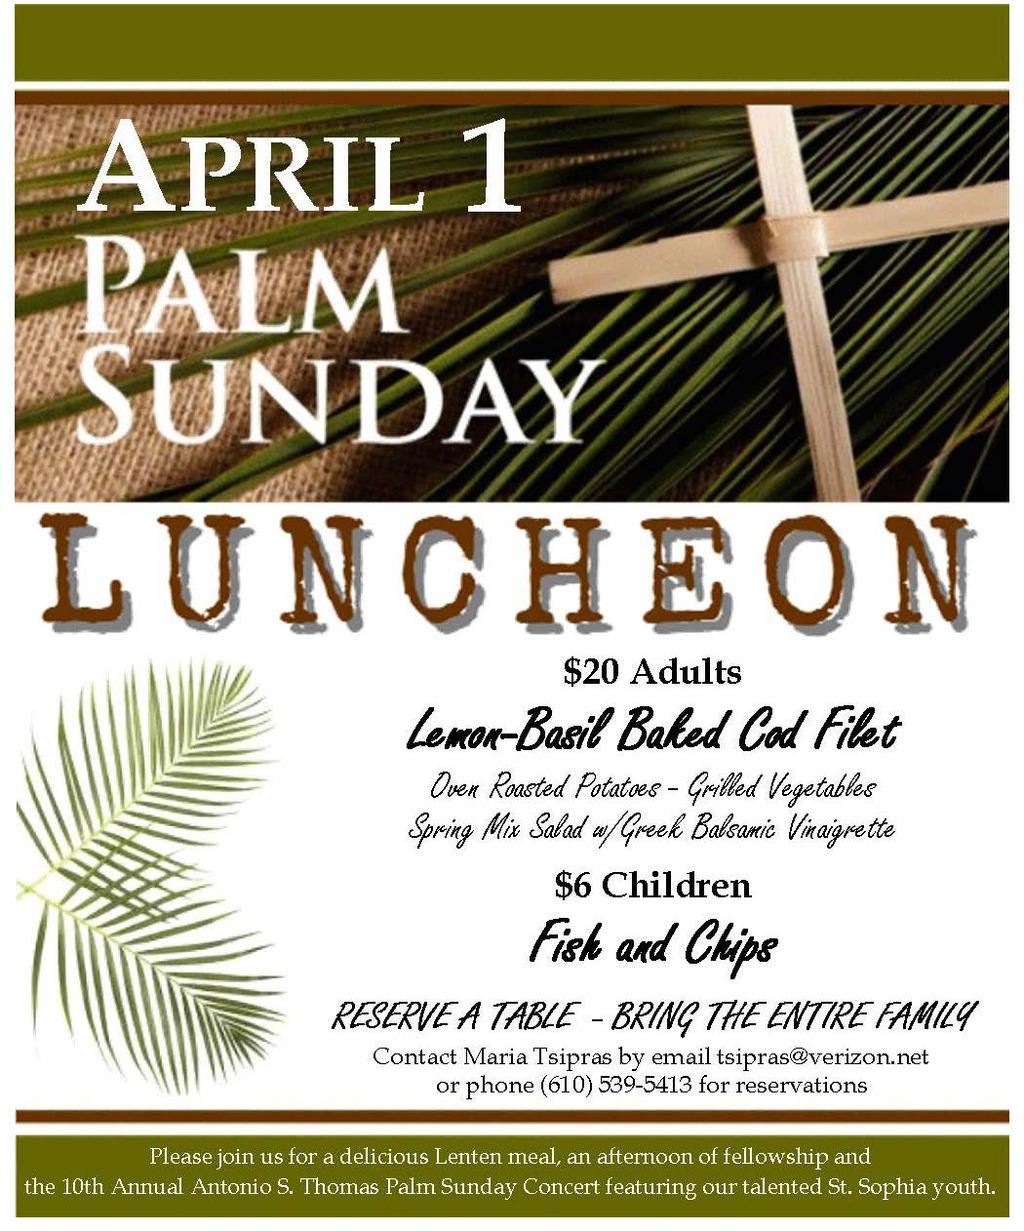 Antonios S. Thomas Concert: On Palm Sunday, April 1 st, we will hold the 10 th Annual Antonios S.Thomas Palm Sunday Concert for the Youth.